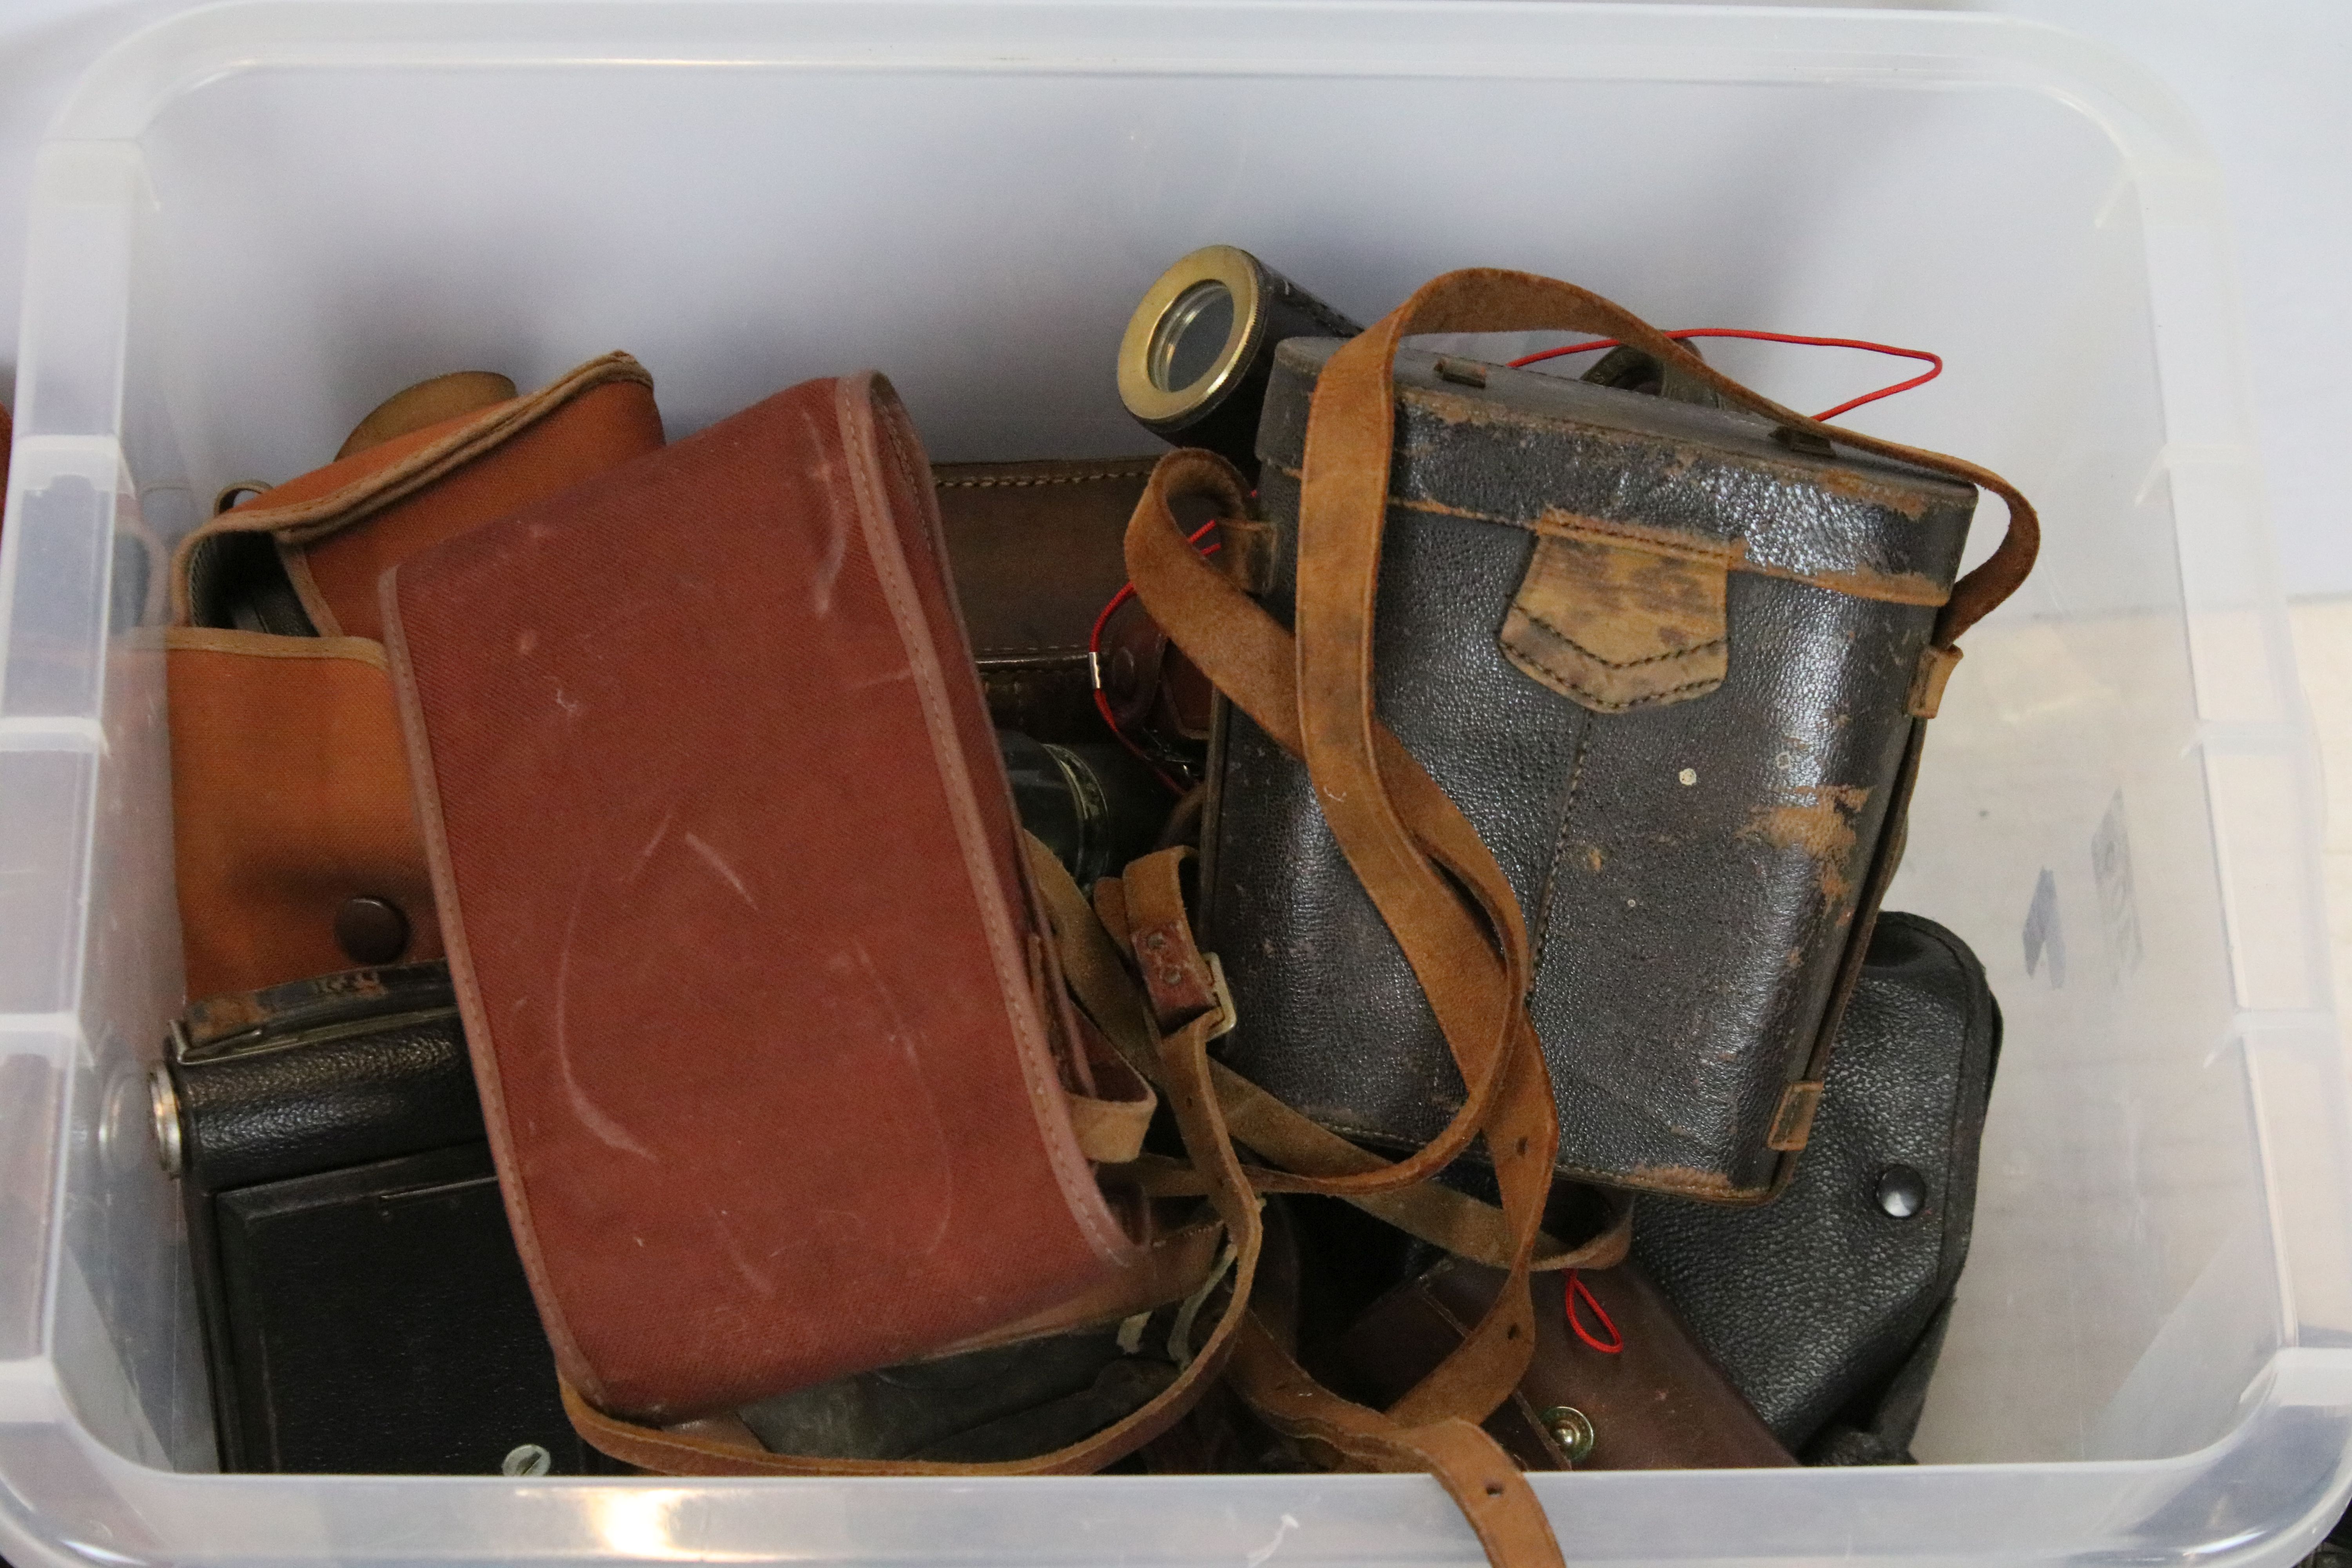 Photographic Equipment - A collection of cameras & accessories to include Agfa, Folding Brownie - Image 7 of 7